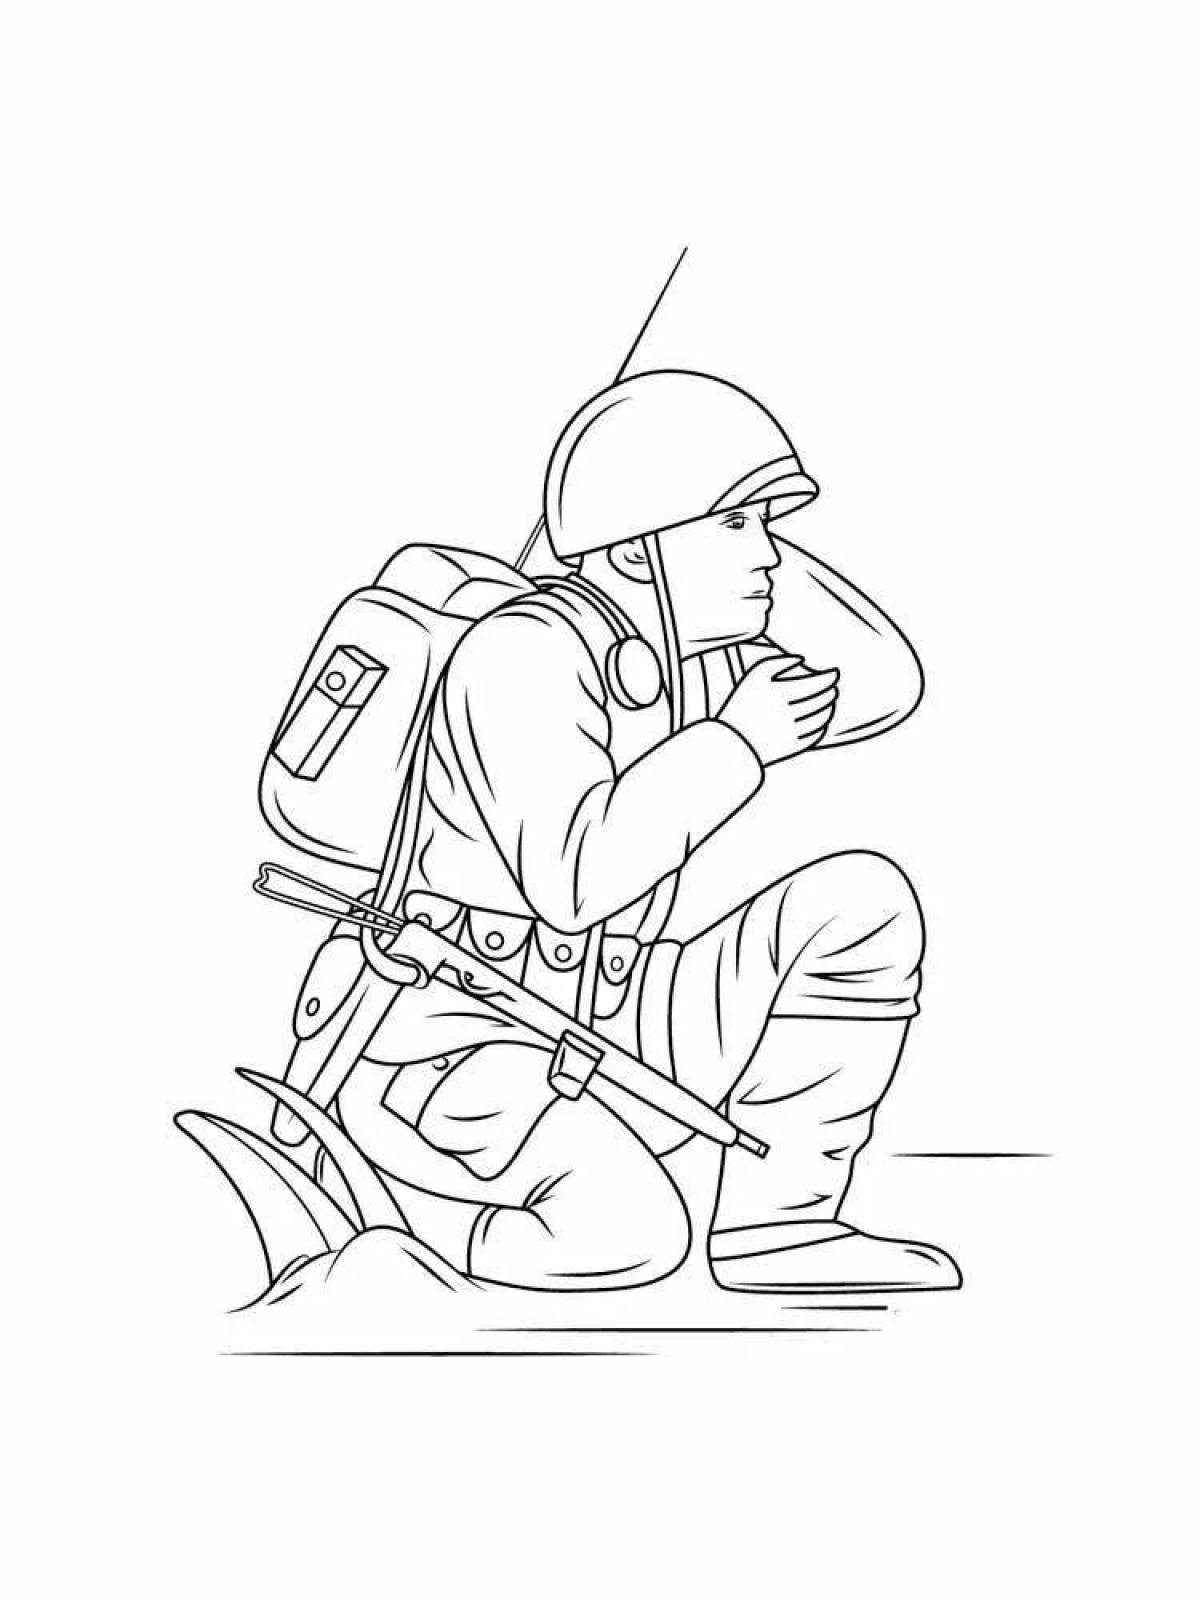 Soldier drawing #1